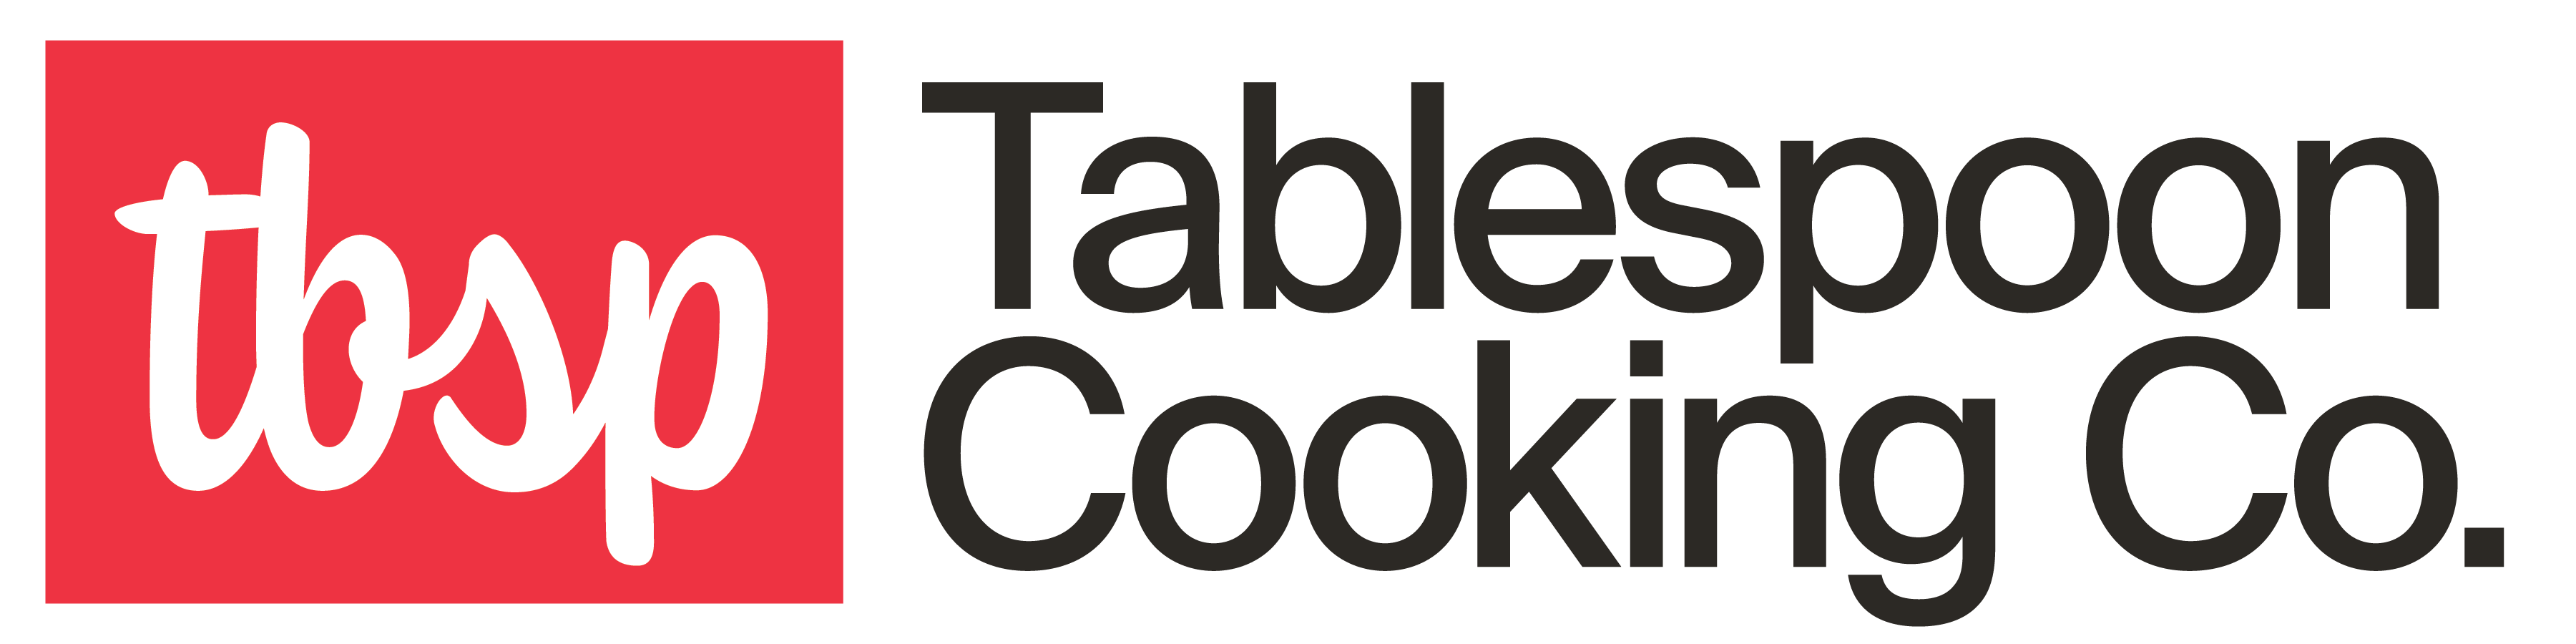 Tablespoon Cooking Co